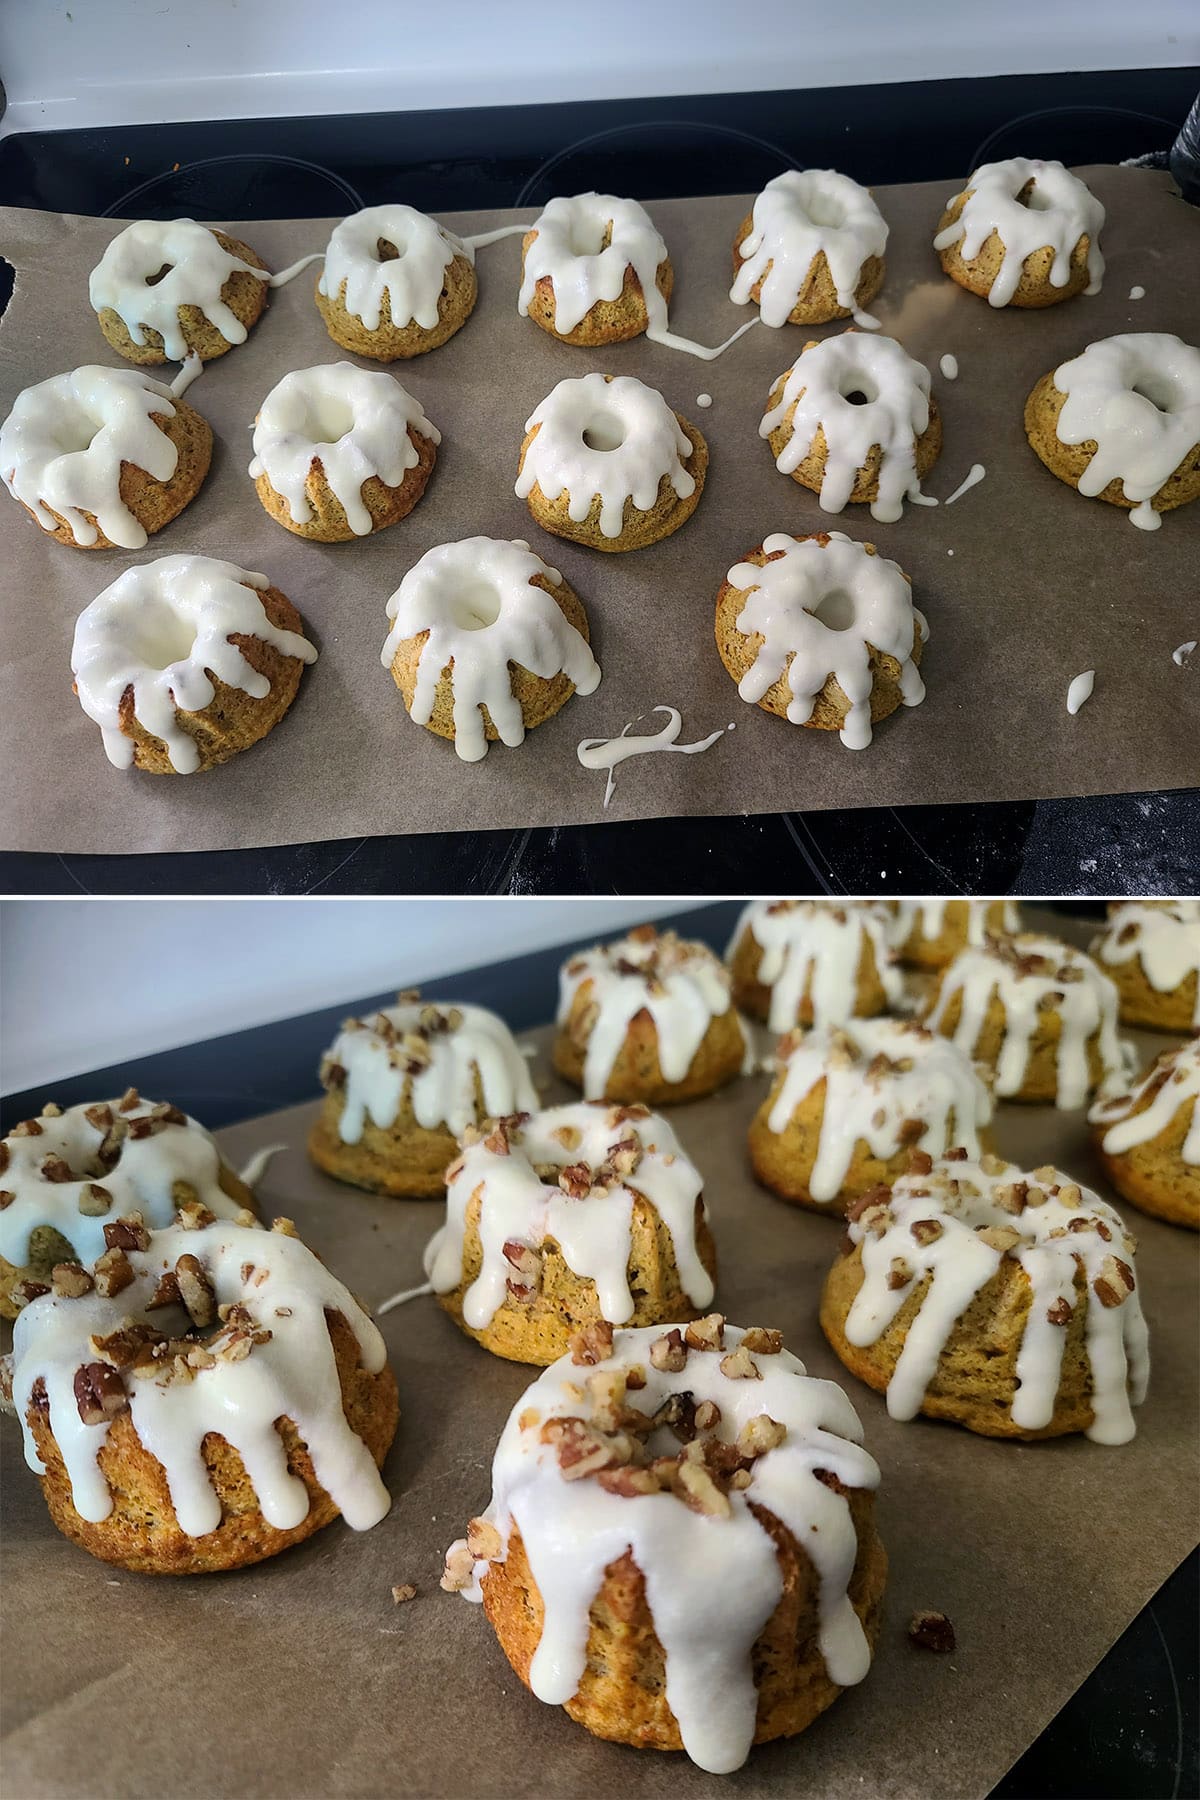 A dozen or so frosted mini bundt cakes, before and after walnuts are scattered on top.